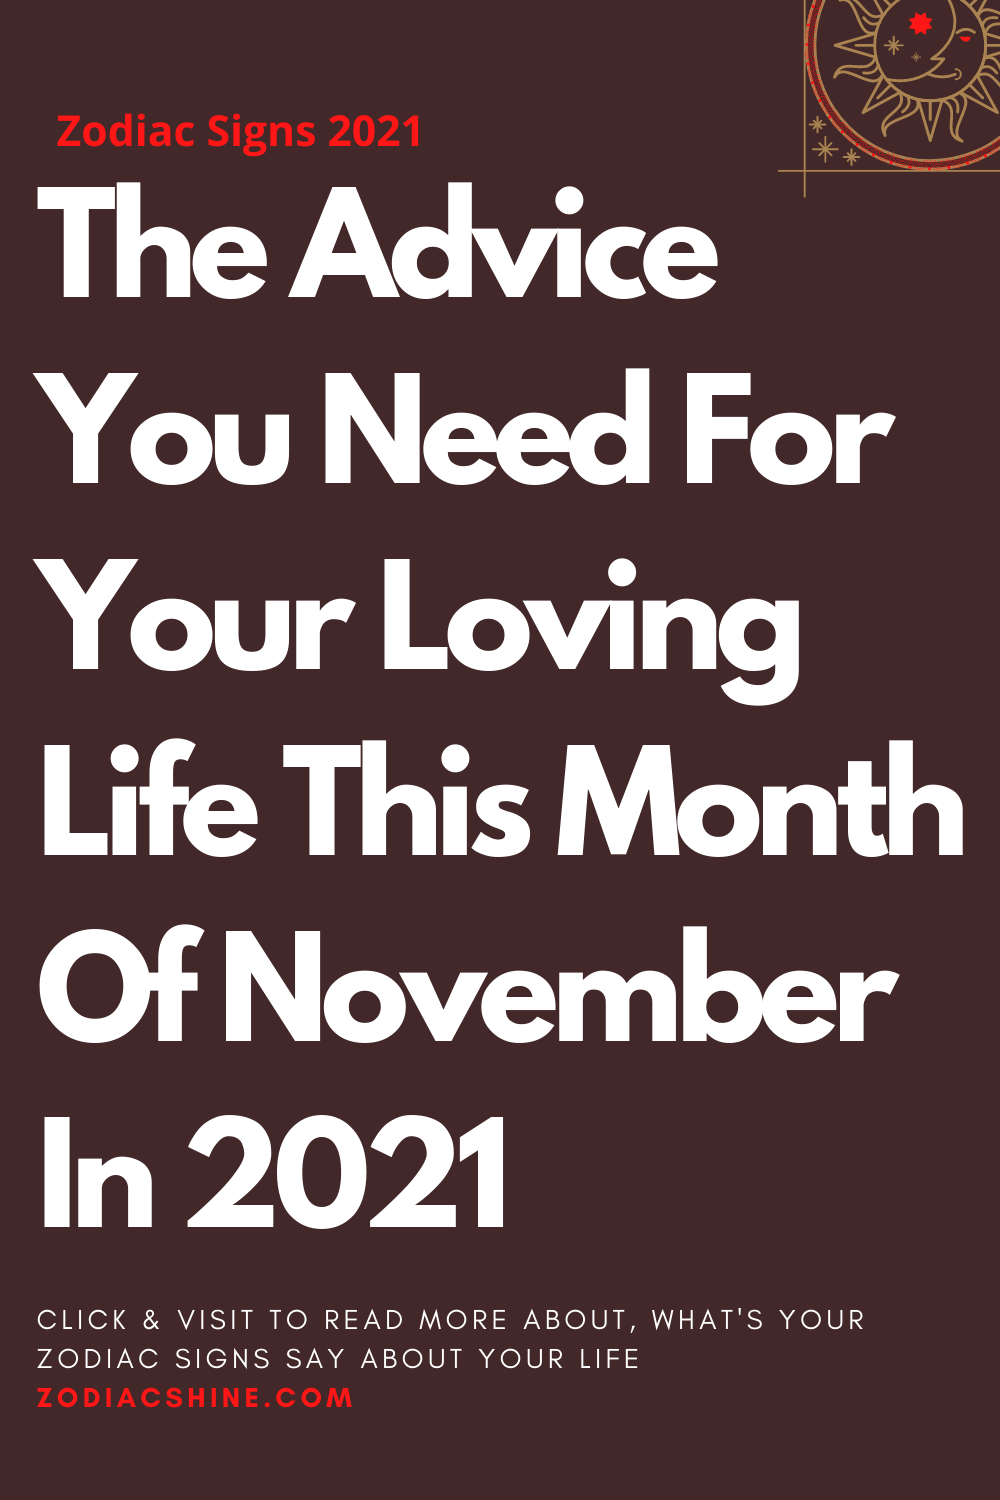 The Advice You Need For Your Loving Life This Month Of November In 2021